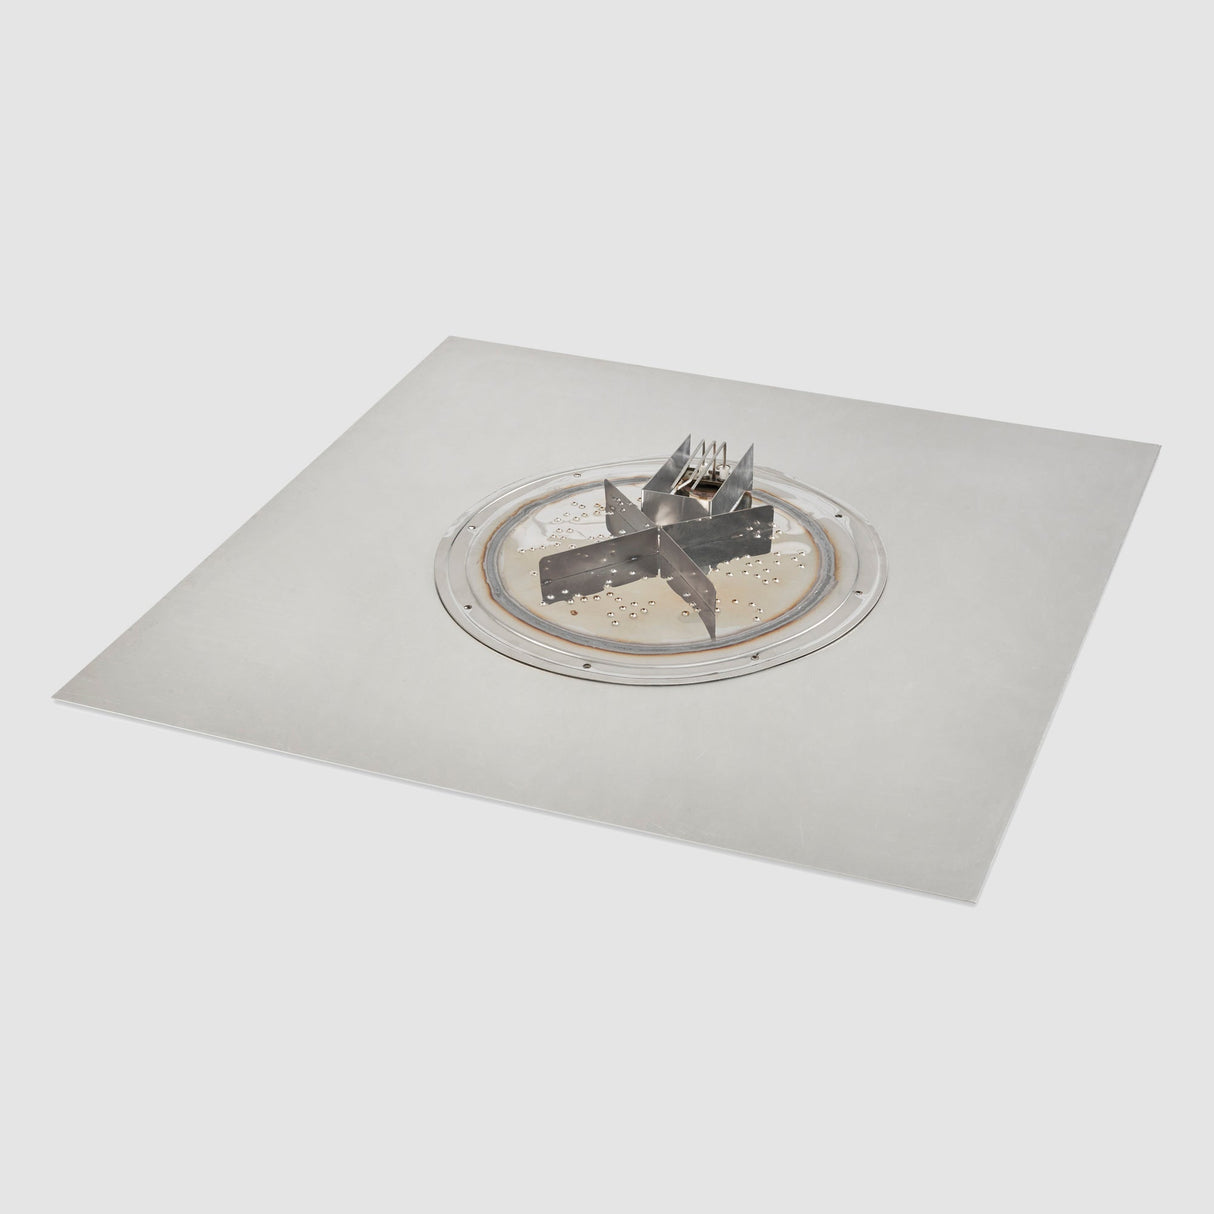 The 30" Crystal Fire Plus Square Gas Burner Insert and Plate Kit with a Direct Spark Ignition on a grey background